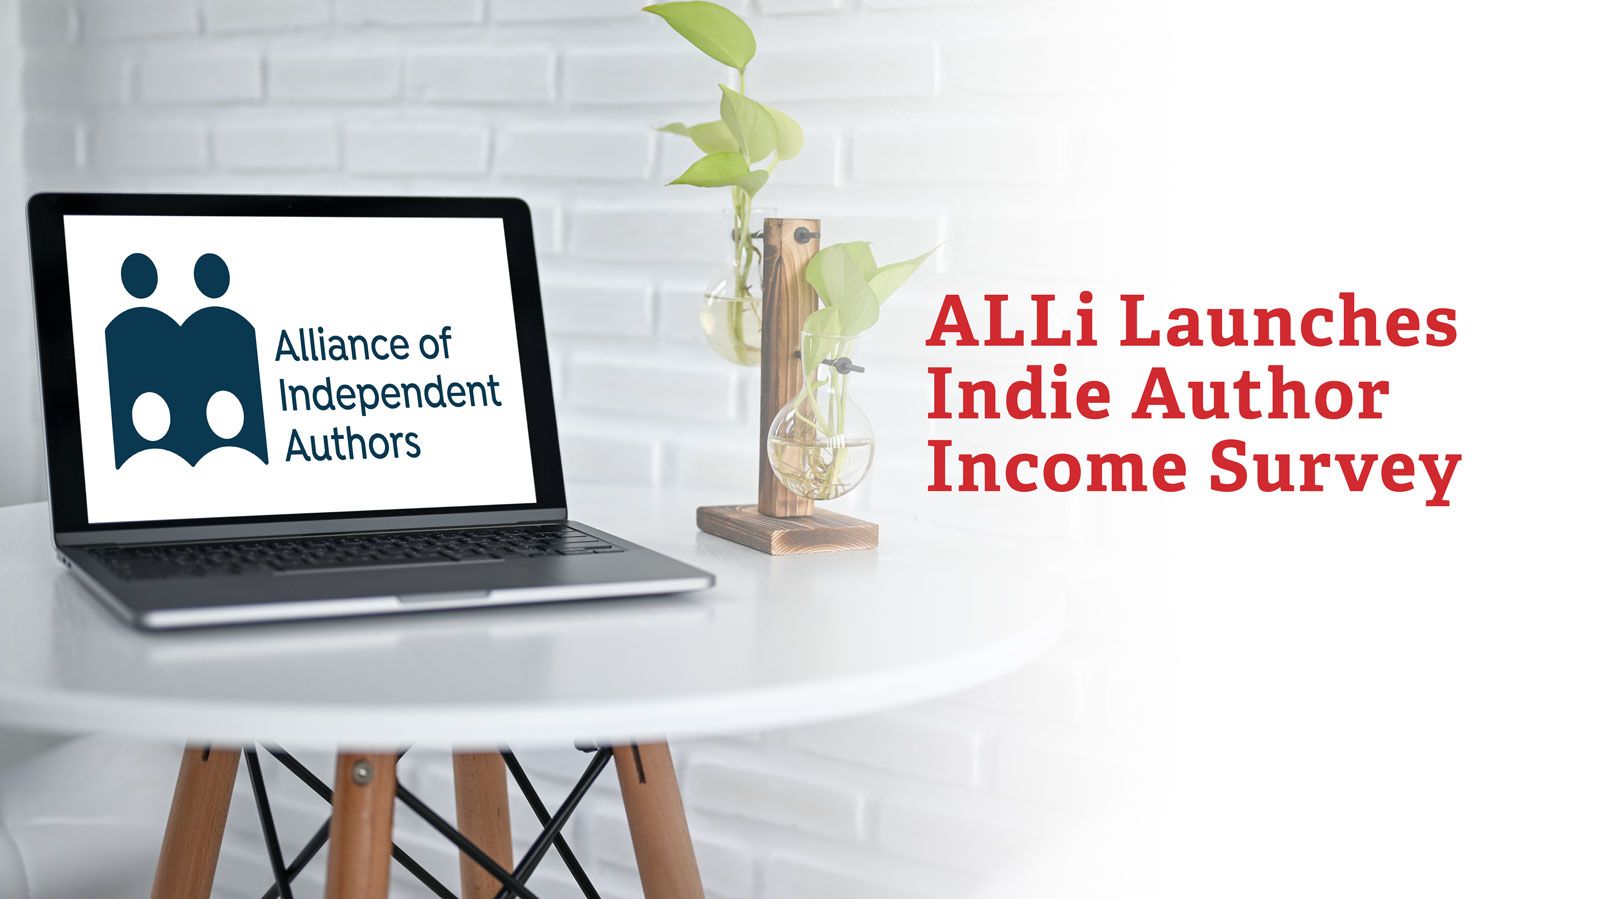 ALLi Launches Indie Author Income Survey